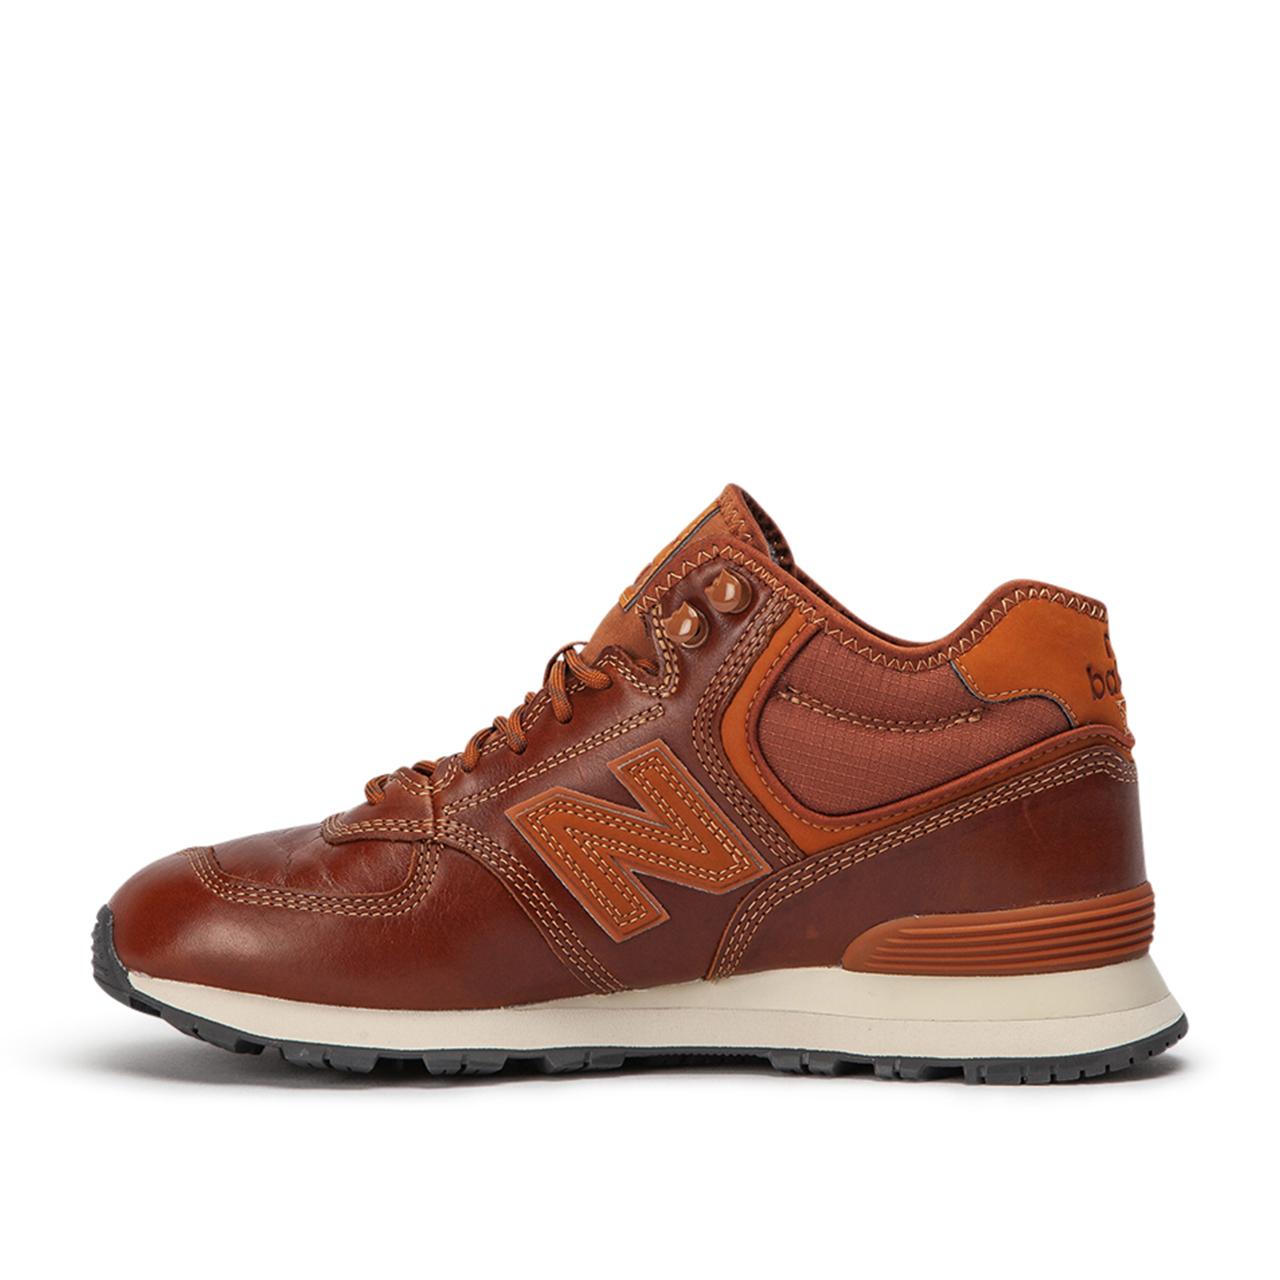 New Balance Leather Mh574 Oad in Brown for Men - Lyst